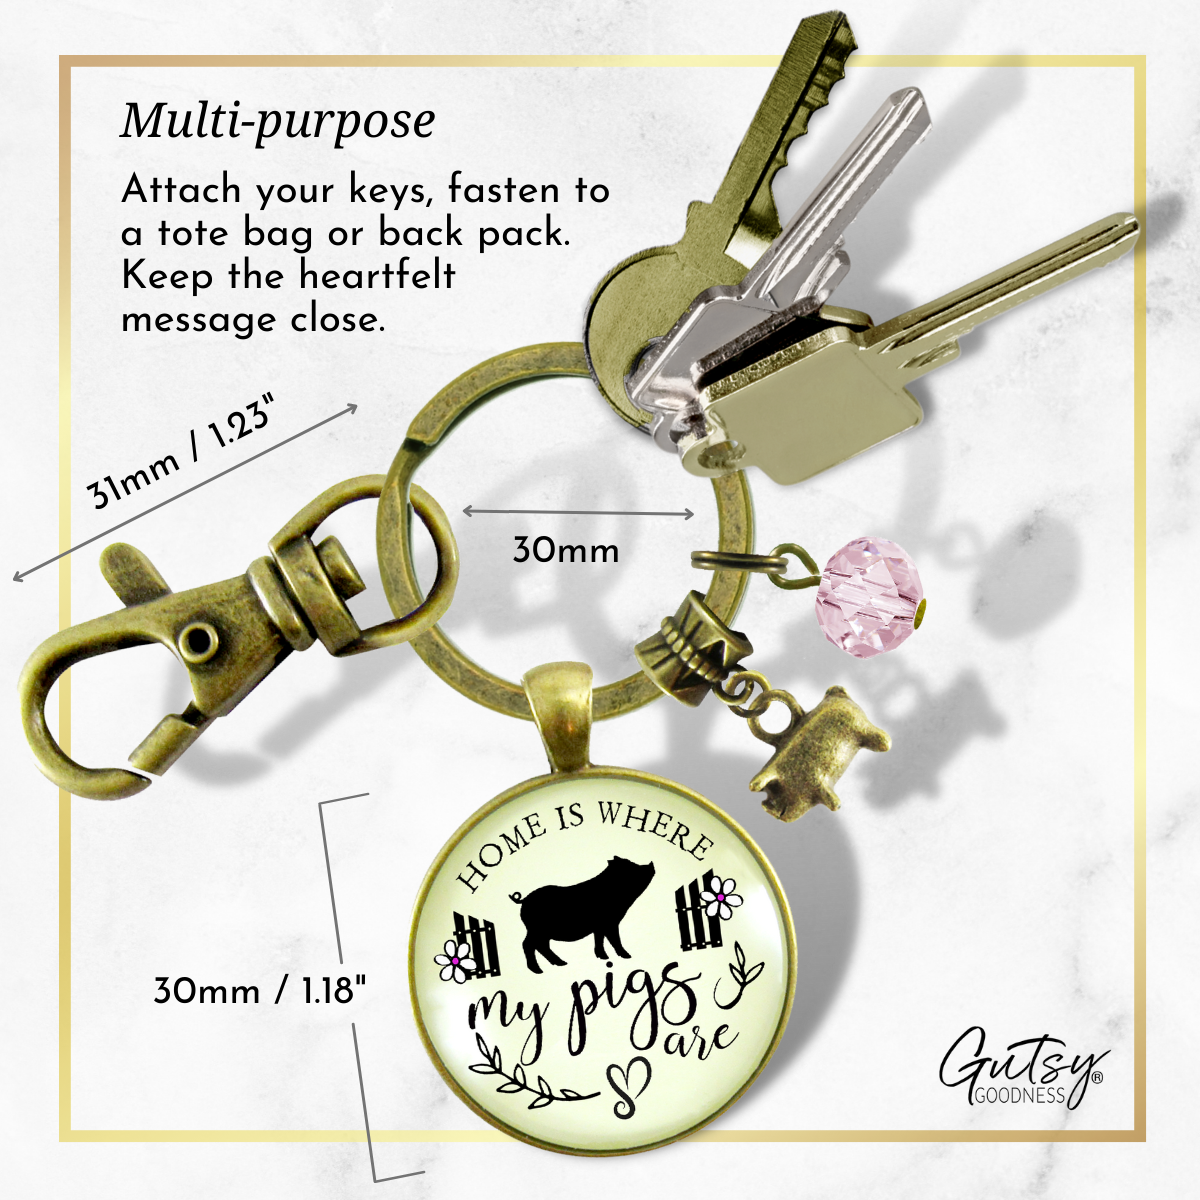 Pig Keychain Home is Where My Pigs Are Farmer Girl Inspired Jewelry - Gutsy Goodness Handmade Jewelry;Pig Keychain Home Is Where My Pigs Are Farmer Girl Inspired Jewelry - Gutsy Goodness Handmade Jewelry Gifts